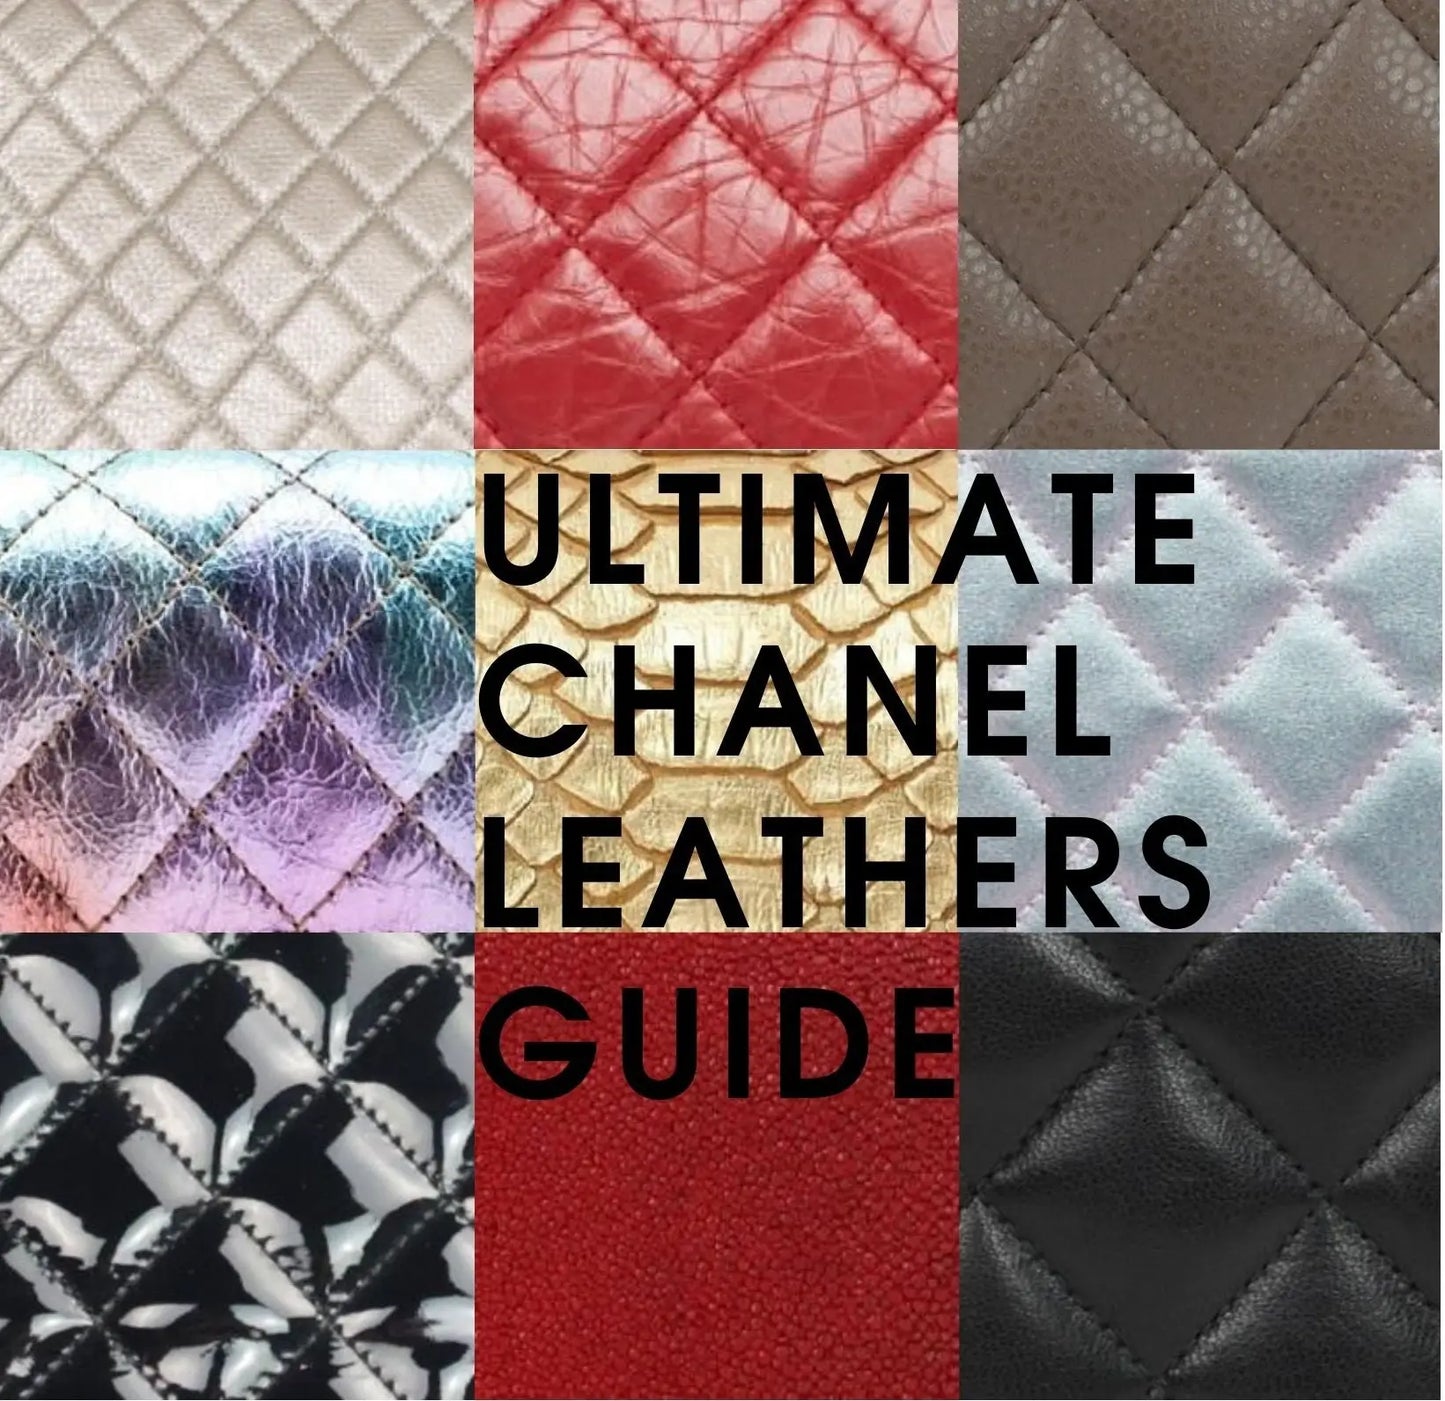 Ultimate Chanel Leather and Material Guide: Which Chanel Leather Is Better?